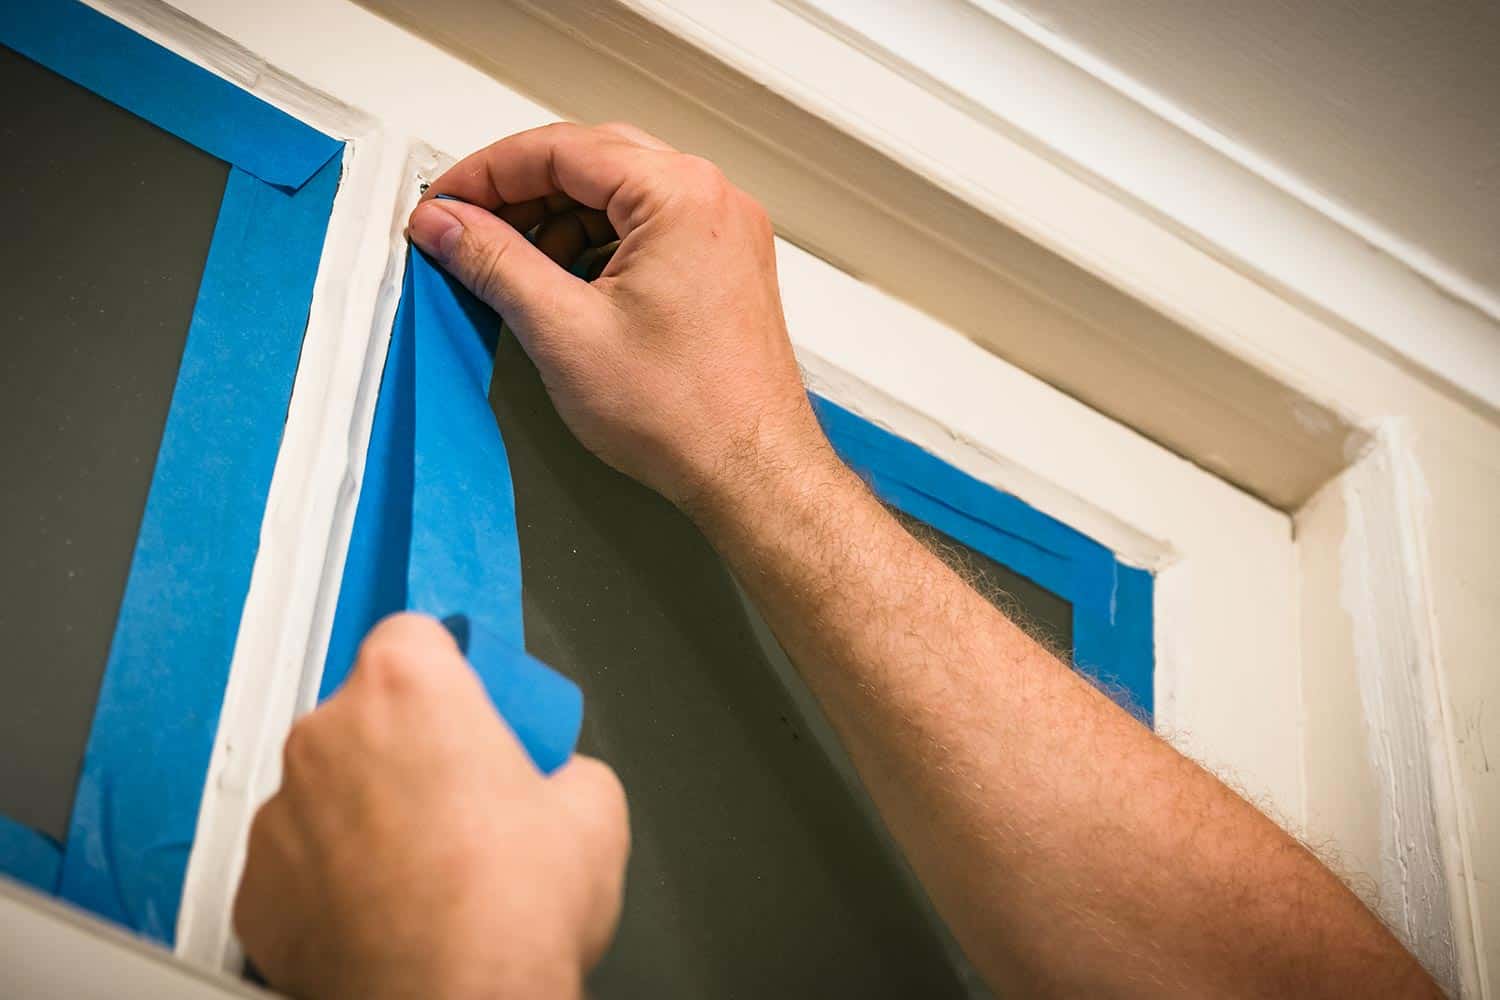 Taping off glass with blue painter's tape